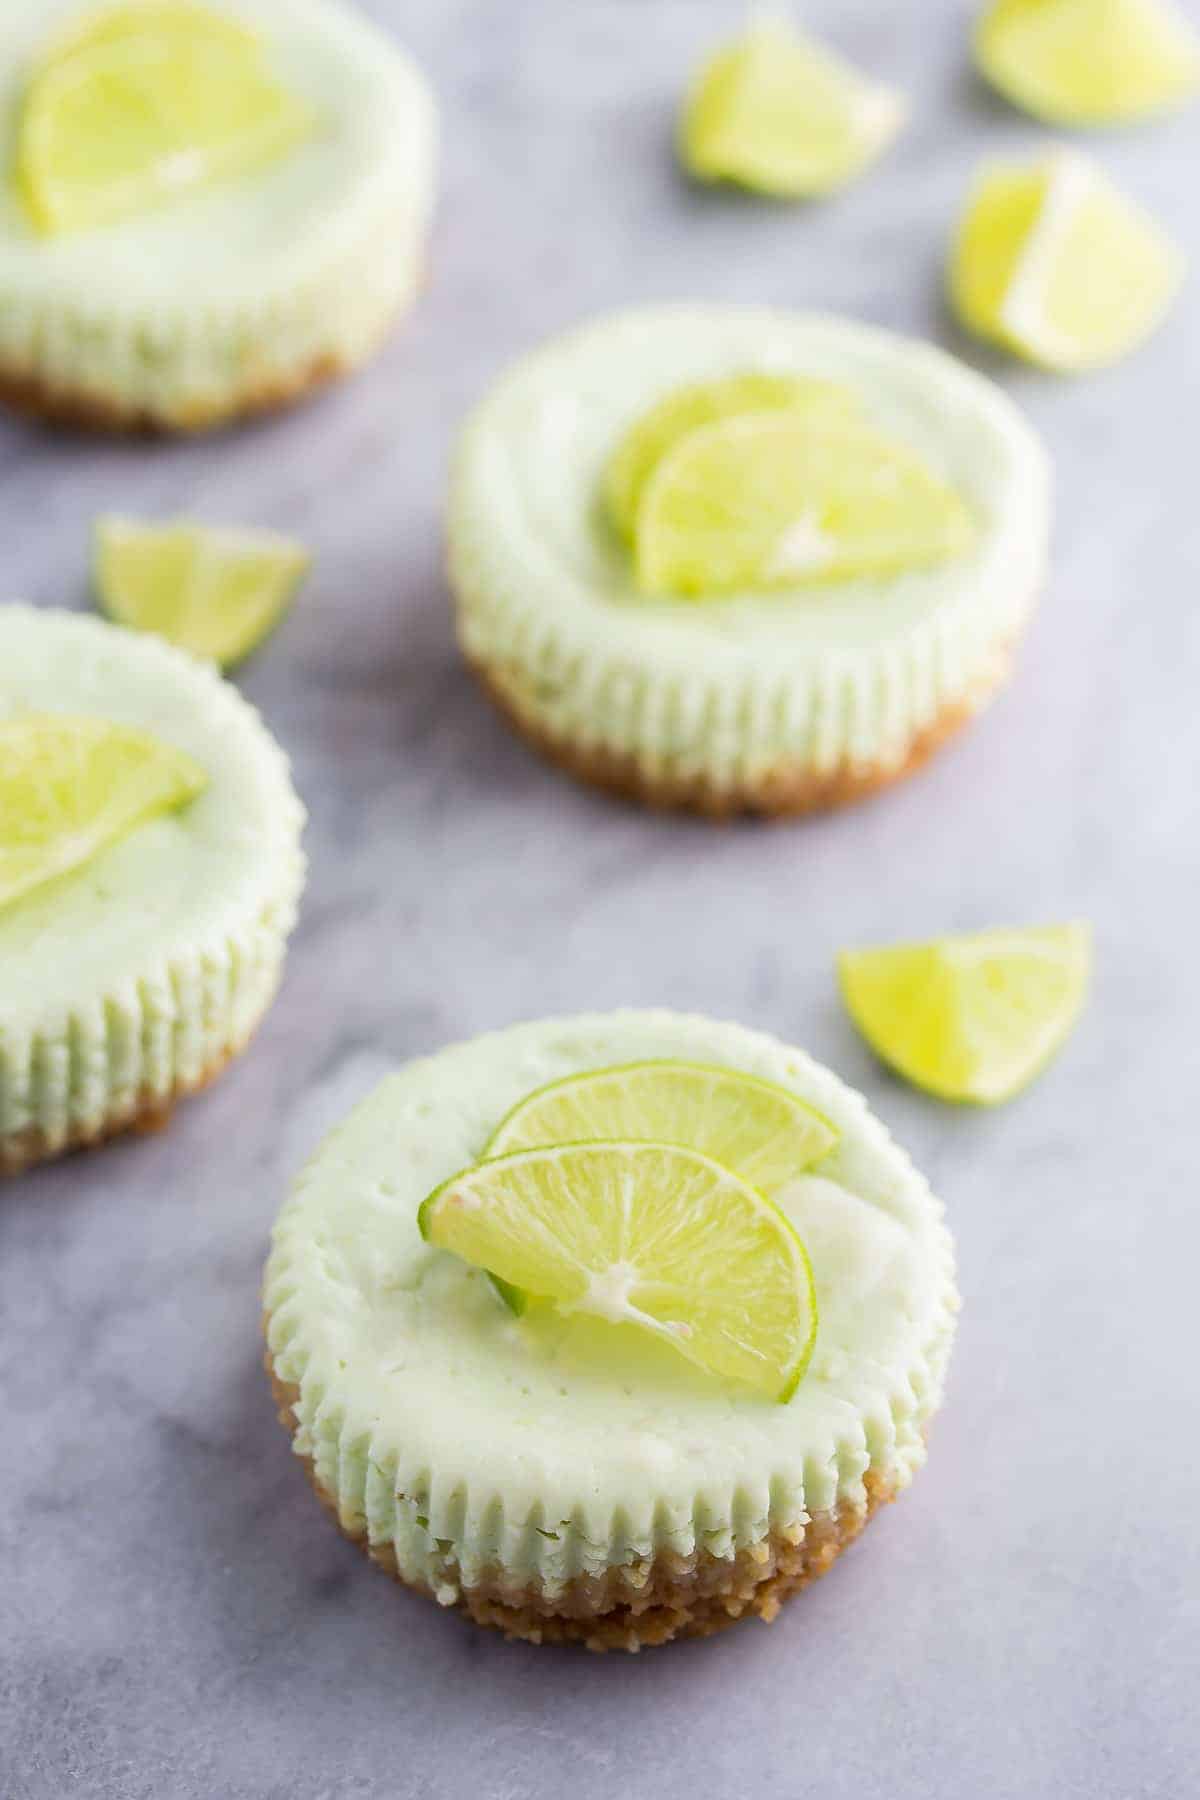  Key Lime Greek Yogurt Cheesecakes, a healthier dessert recipe with only 125 calories per cheesecake!